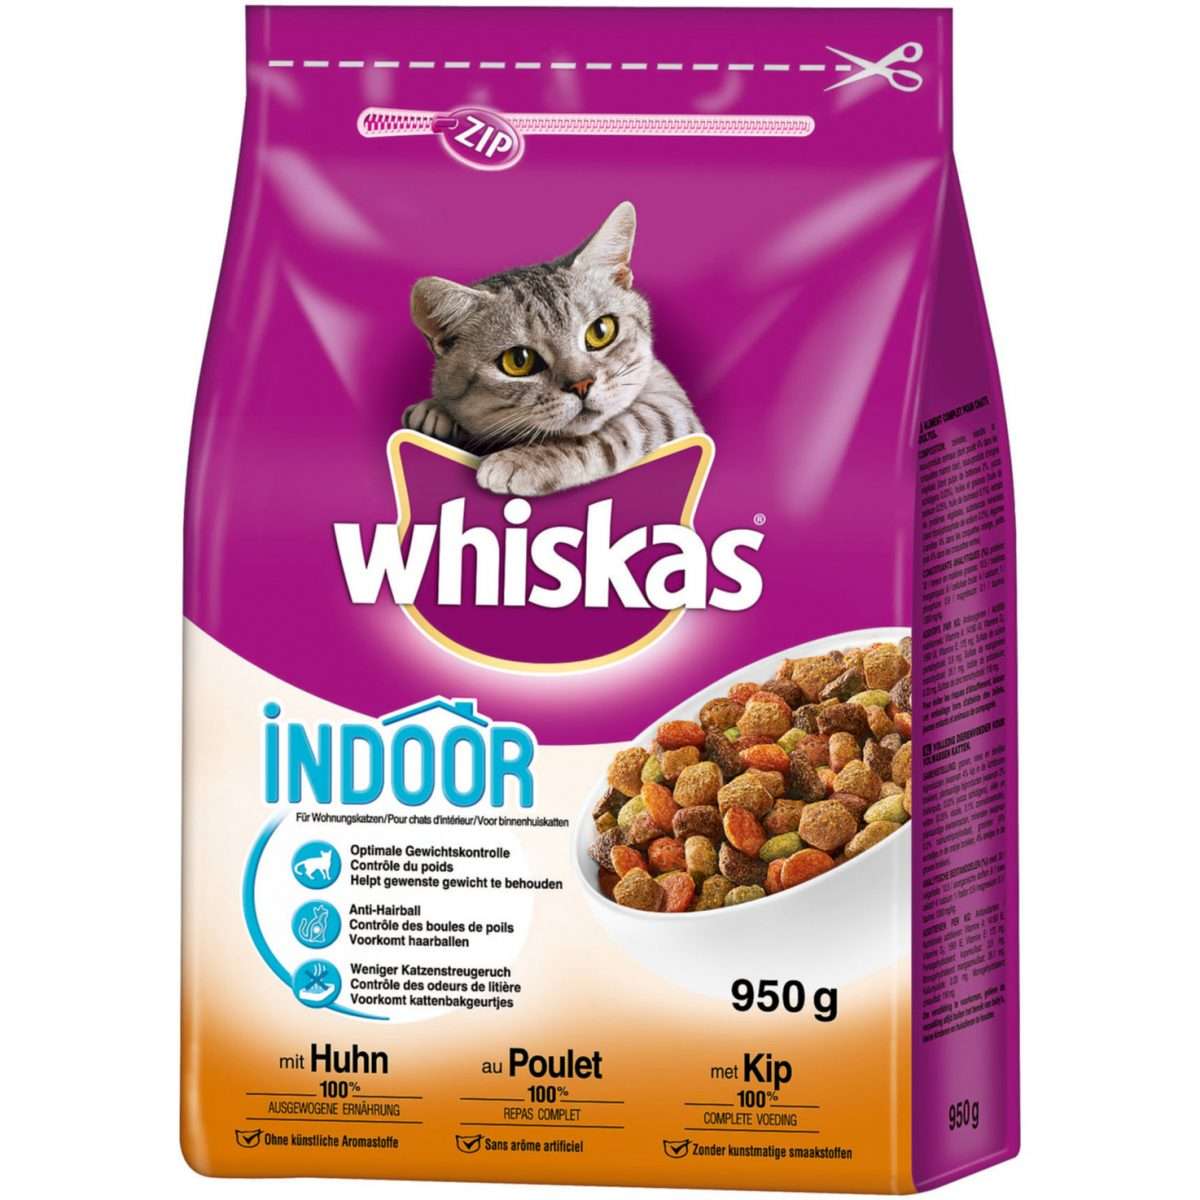 Buy Whiskas Indoor Dry Cat Food (950g) cheaply